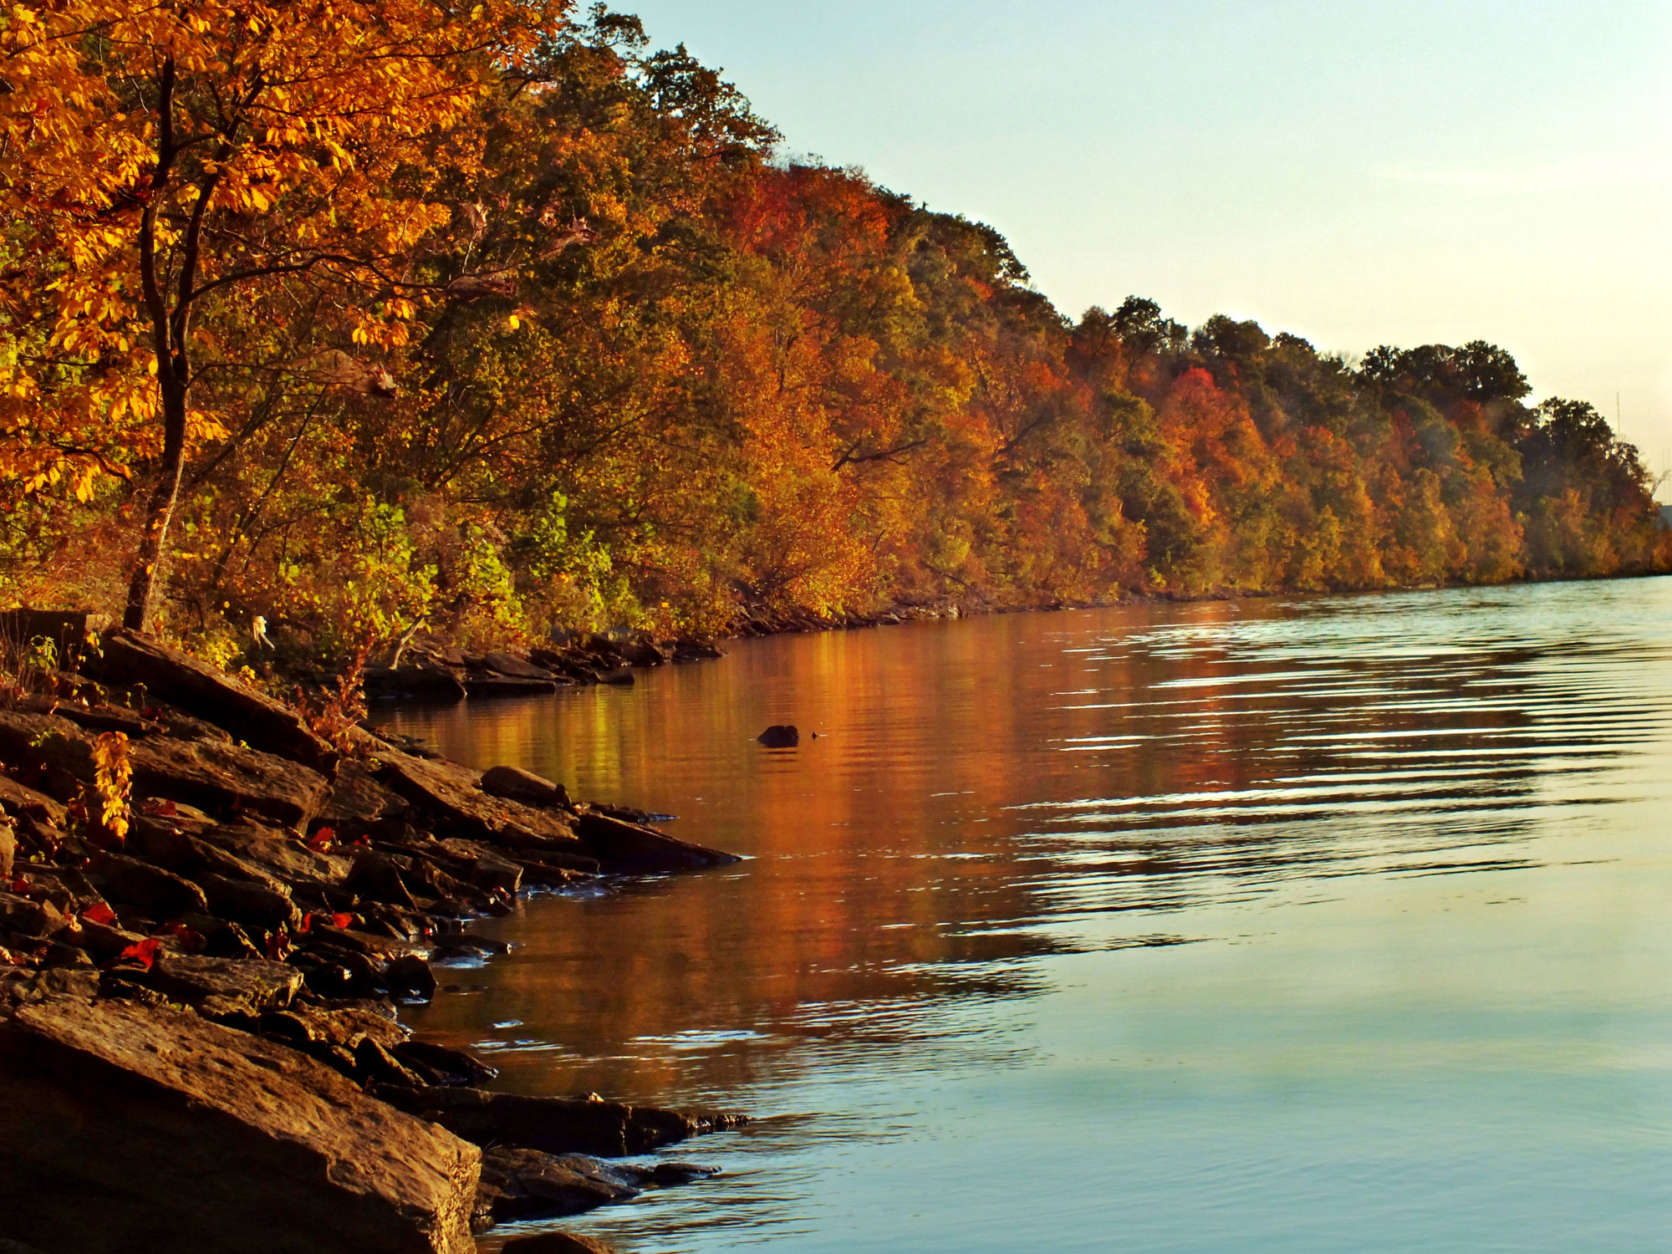 Shoreline of Cumberland river from Shelby Bottoms Greenway just under the Pedestrian bridge